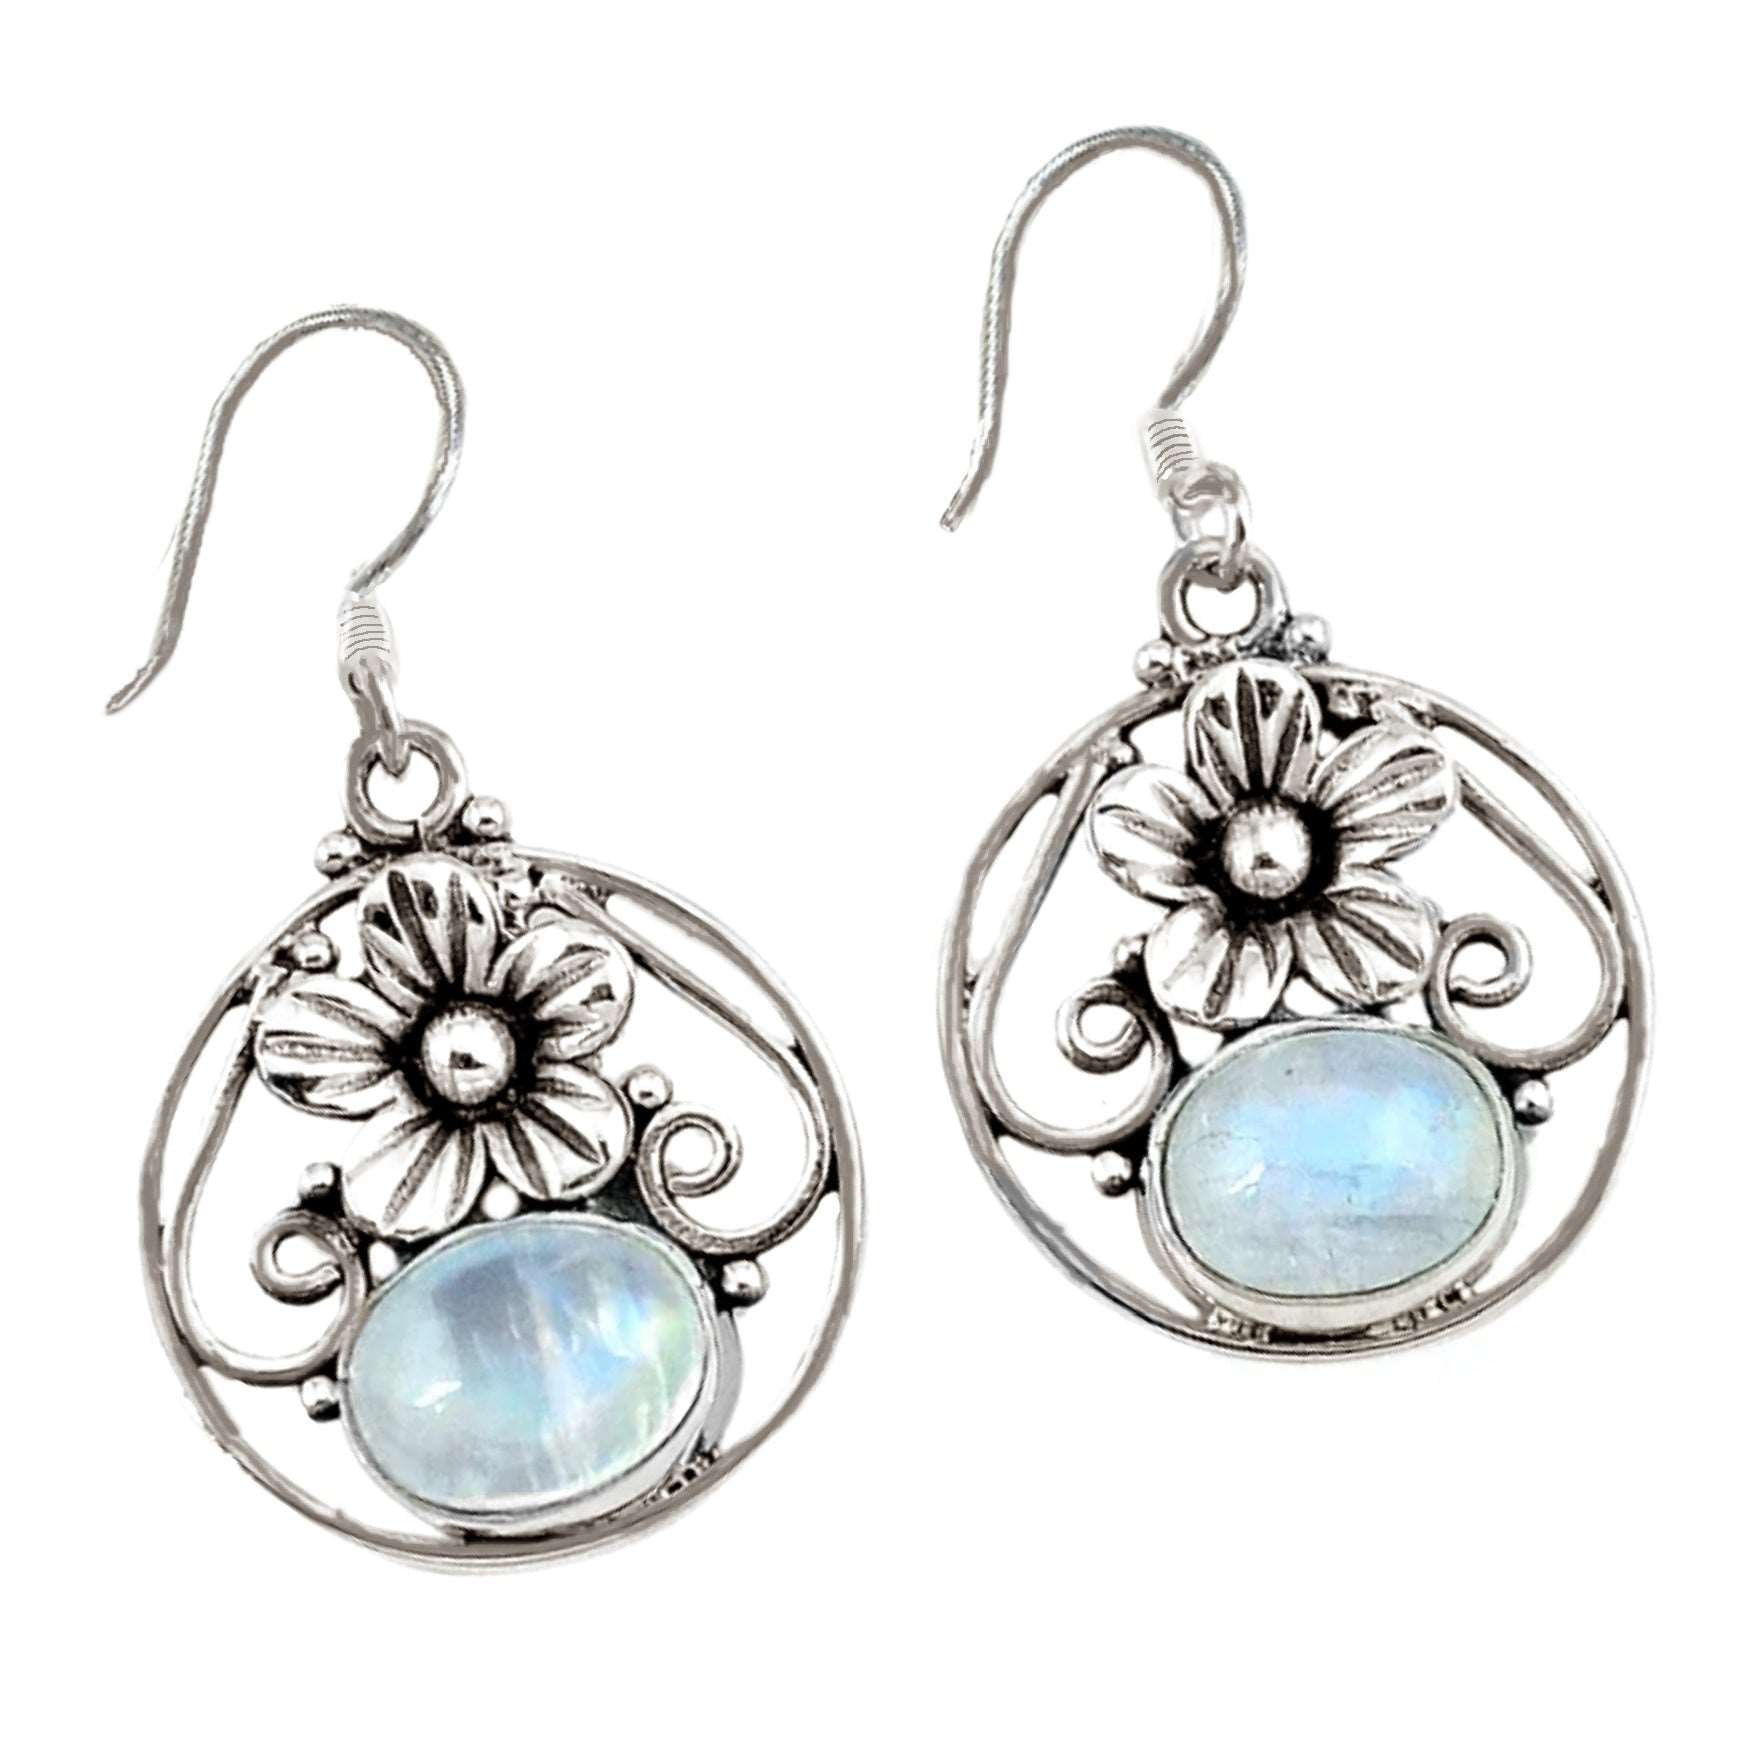 6.77 cts Natural Rainbow Moonstone Gemstone Solid .925 Silver Earrings